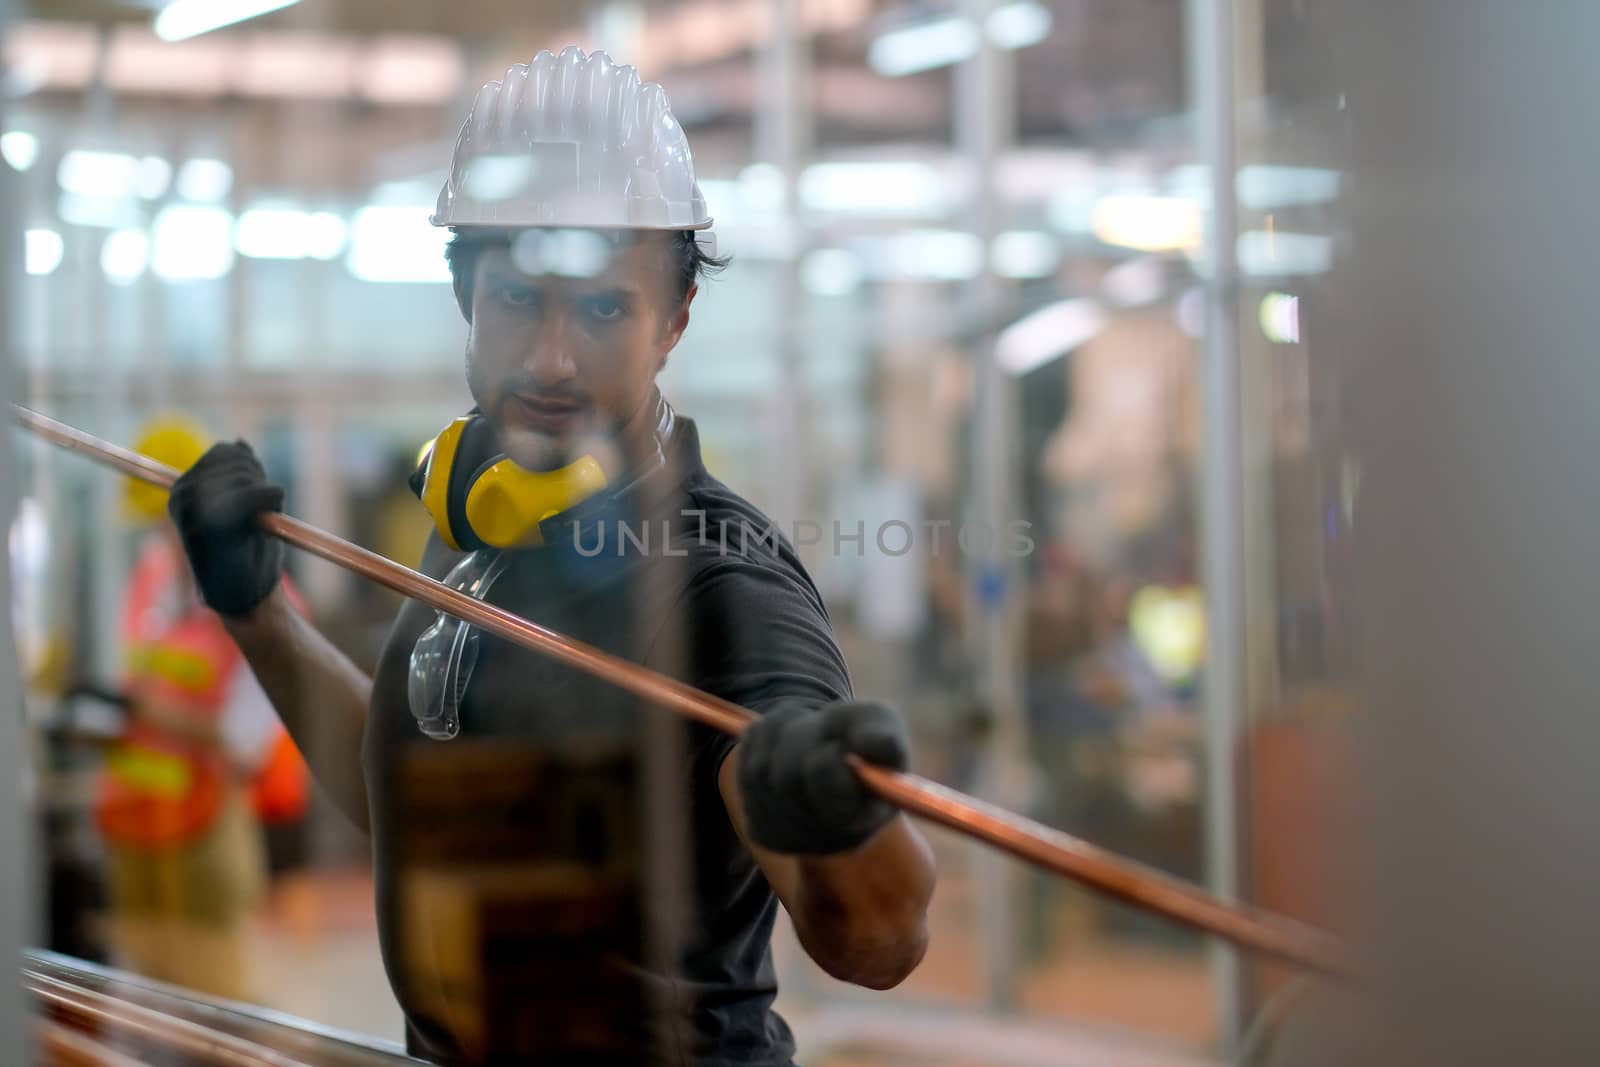 Technician or worker man hold copper pipe and look through glass window in the factory.